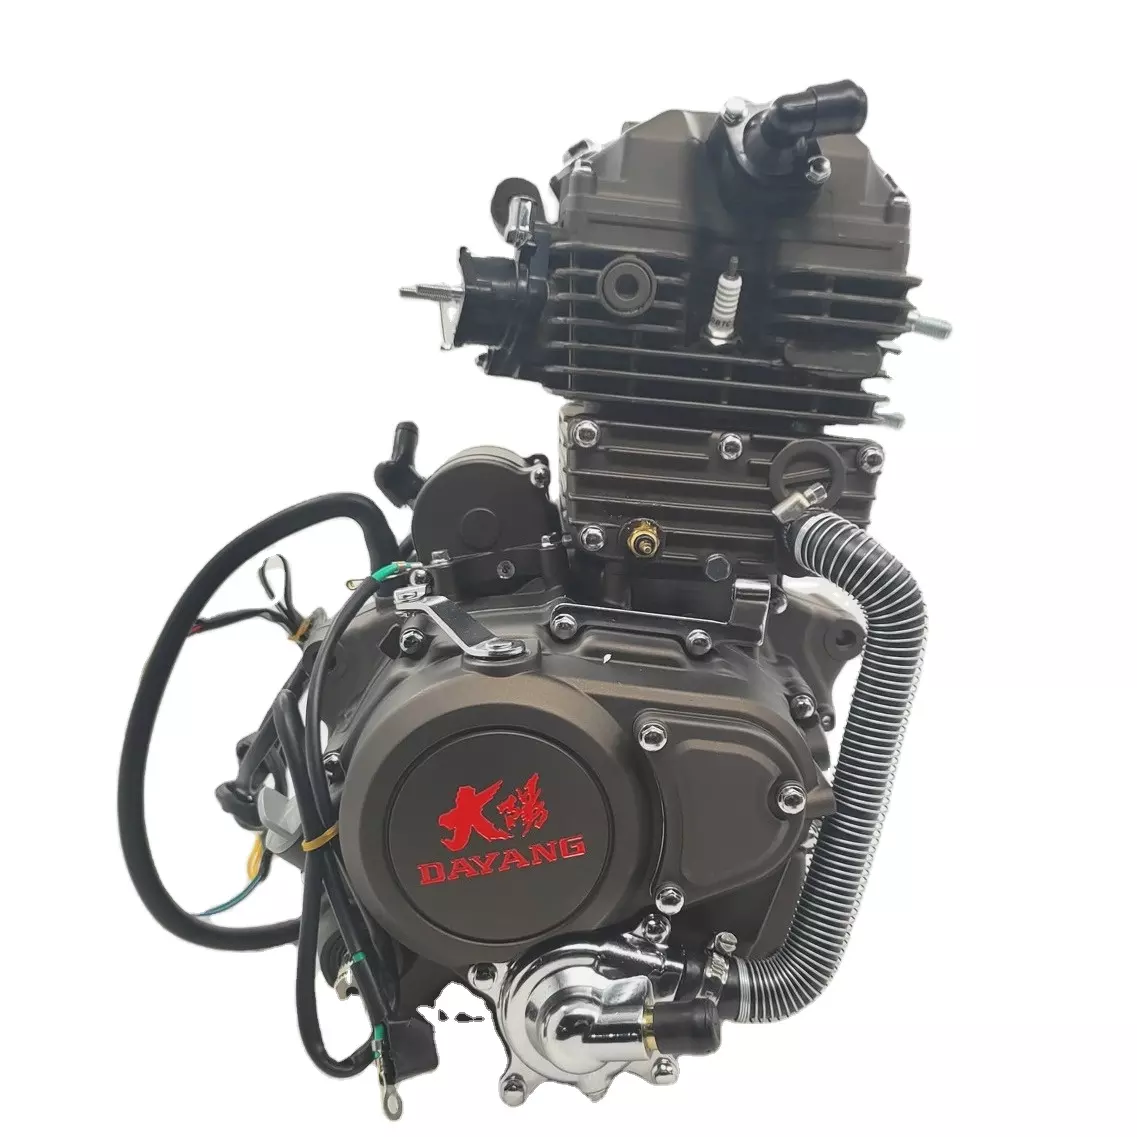 LIFAN CG cool 200cc DAYANG Motorcycle Engine Assembly Single Cylinder Four Stroke Style China Origin Quality CCC